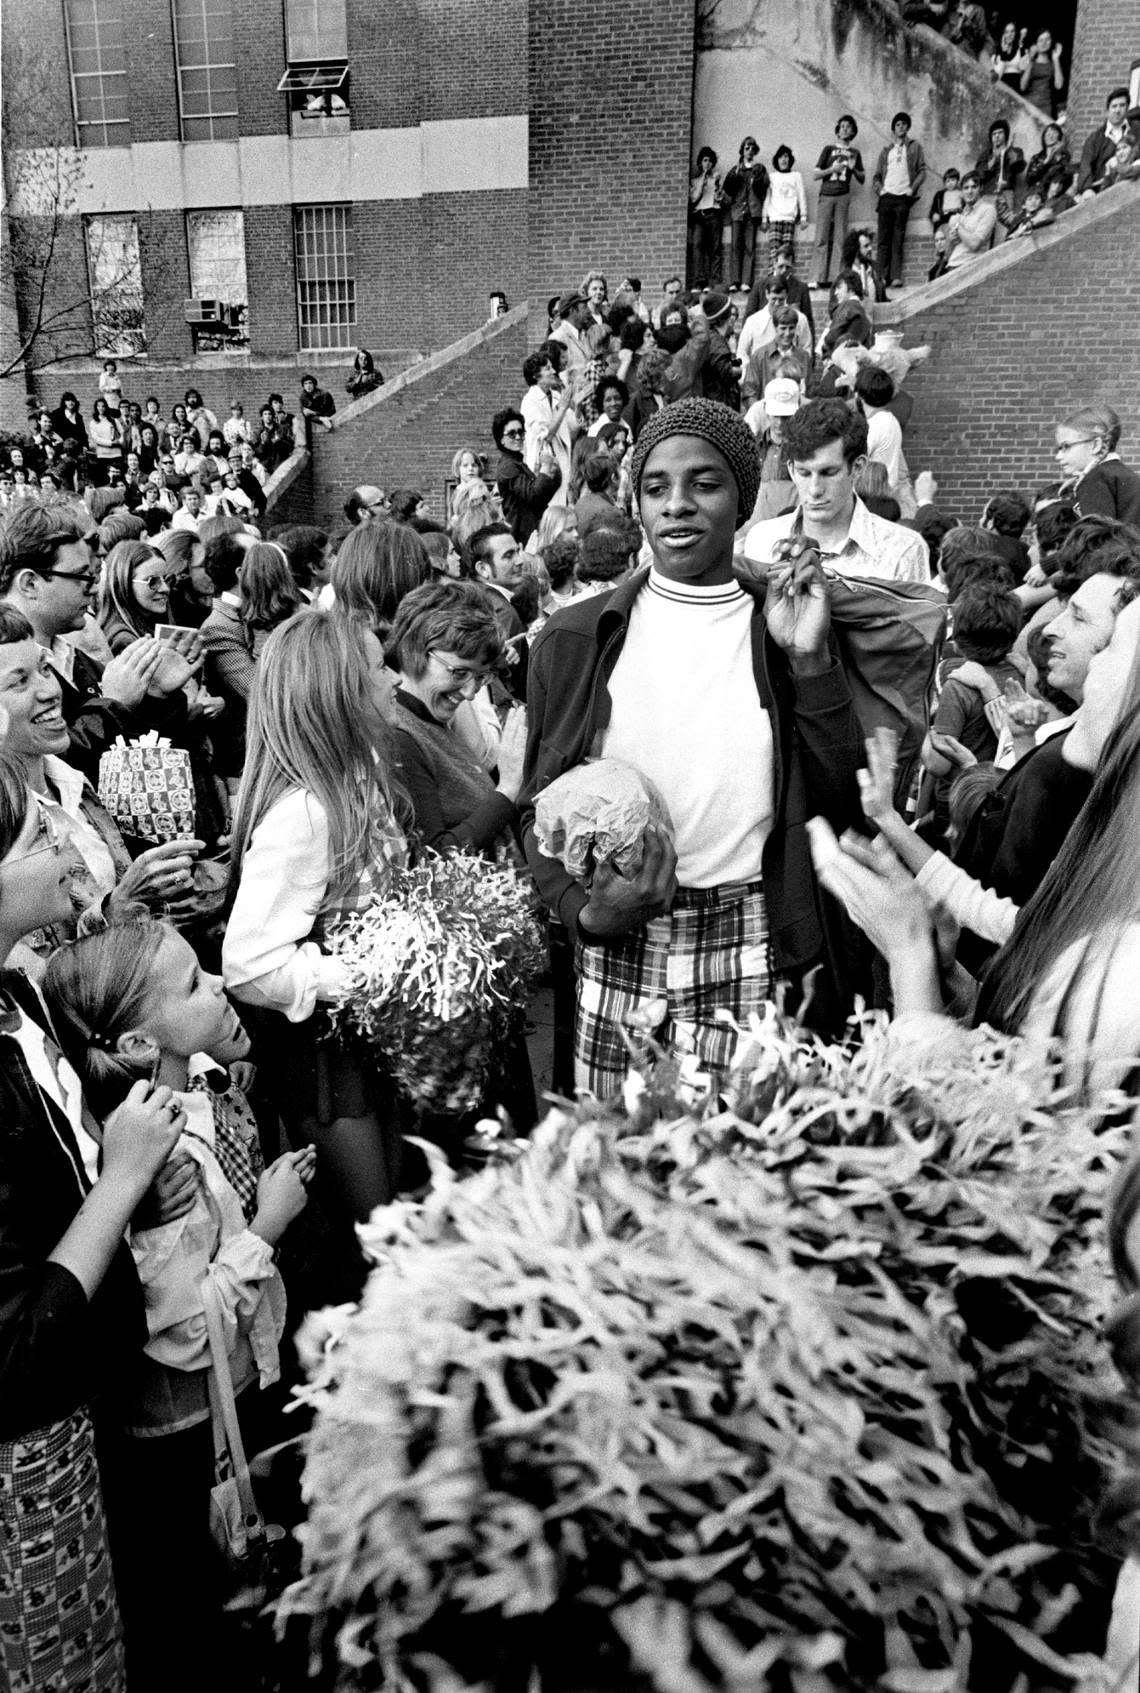 NC State’s David Thompson makes his way through a crowd of fans and cheerleaders as he and other Wolfpack players board a bus to take them the the 1974 National Championship.